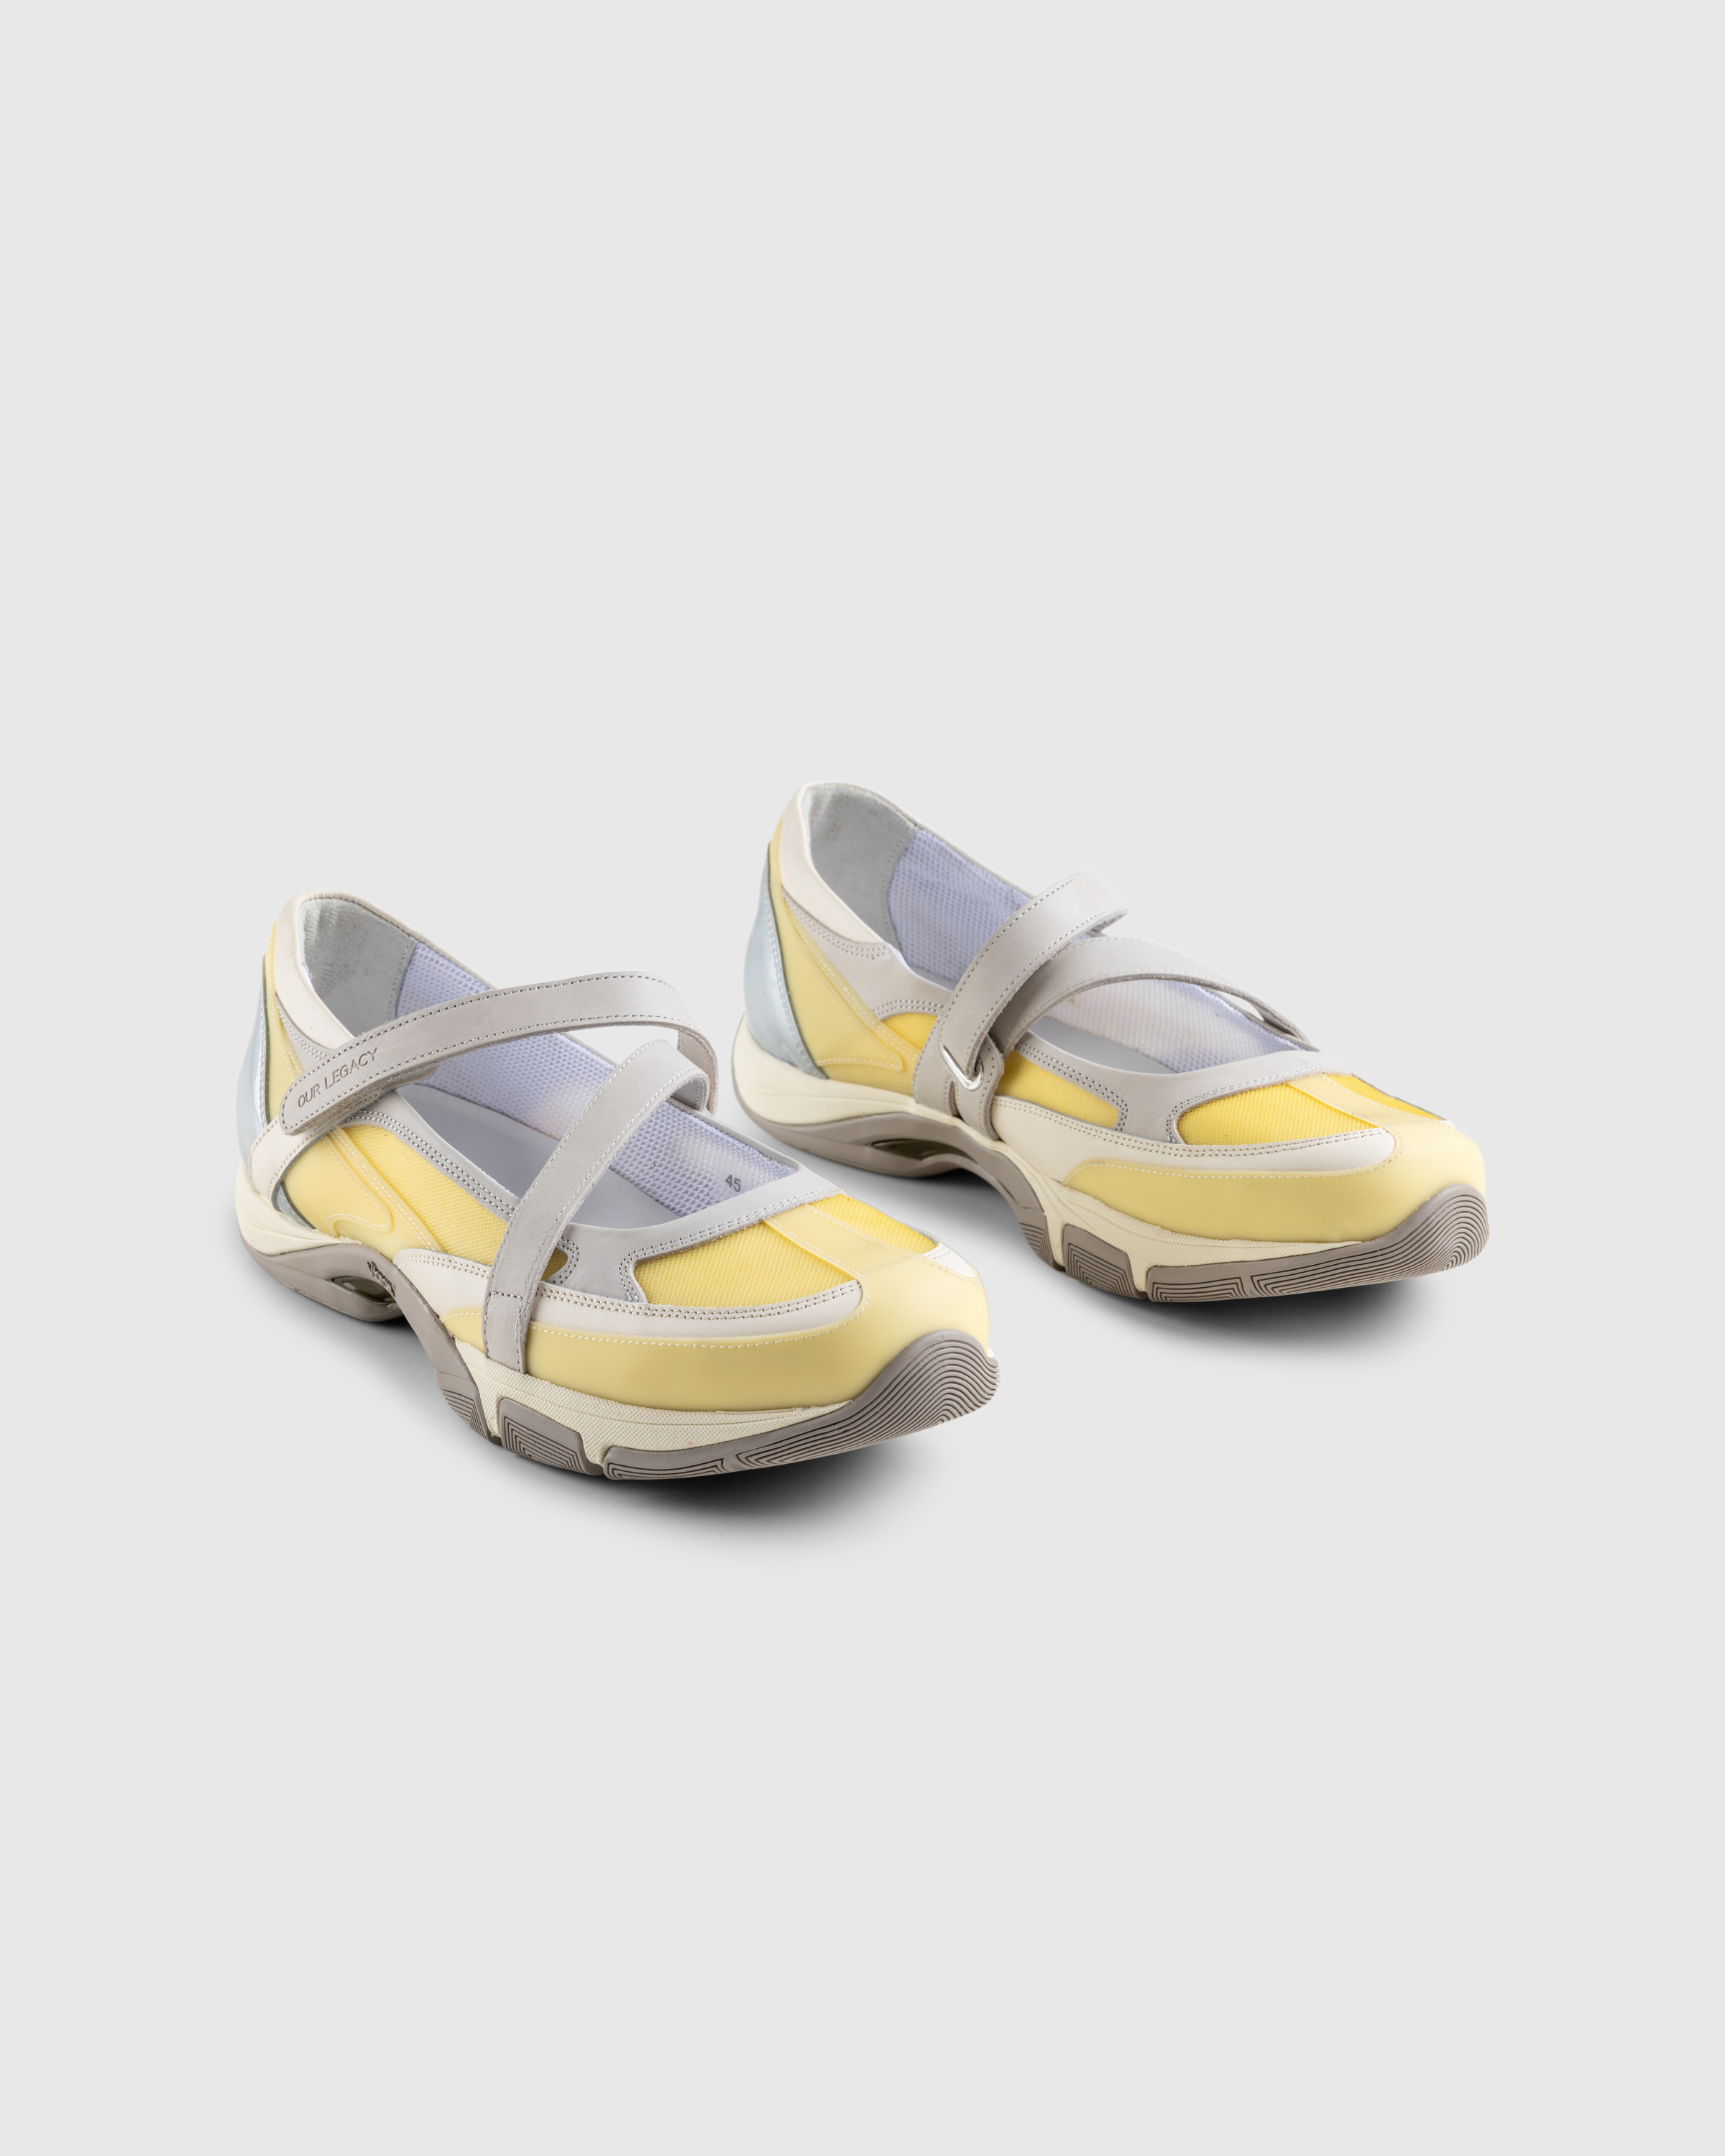 Our Legacy – Sweetheart Sport Technical Acid Leather - Shoes - Yellow - Image 3